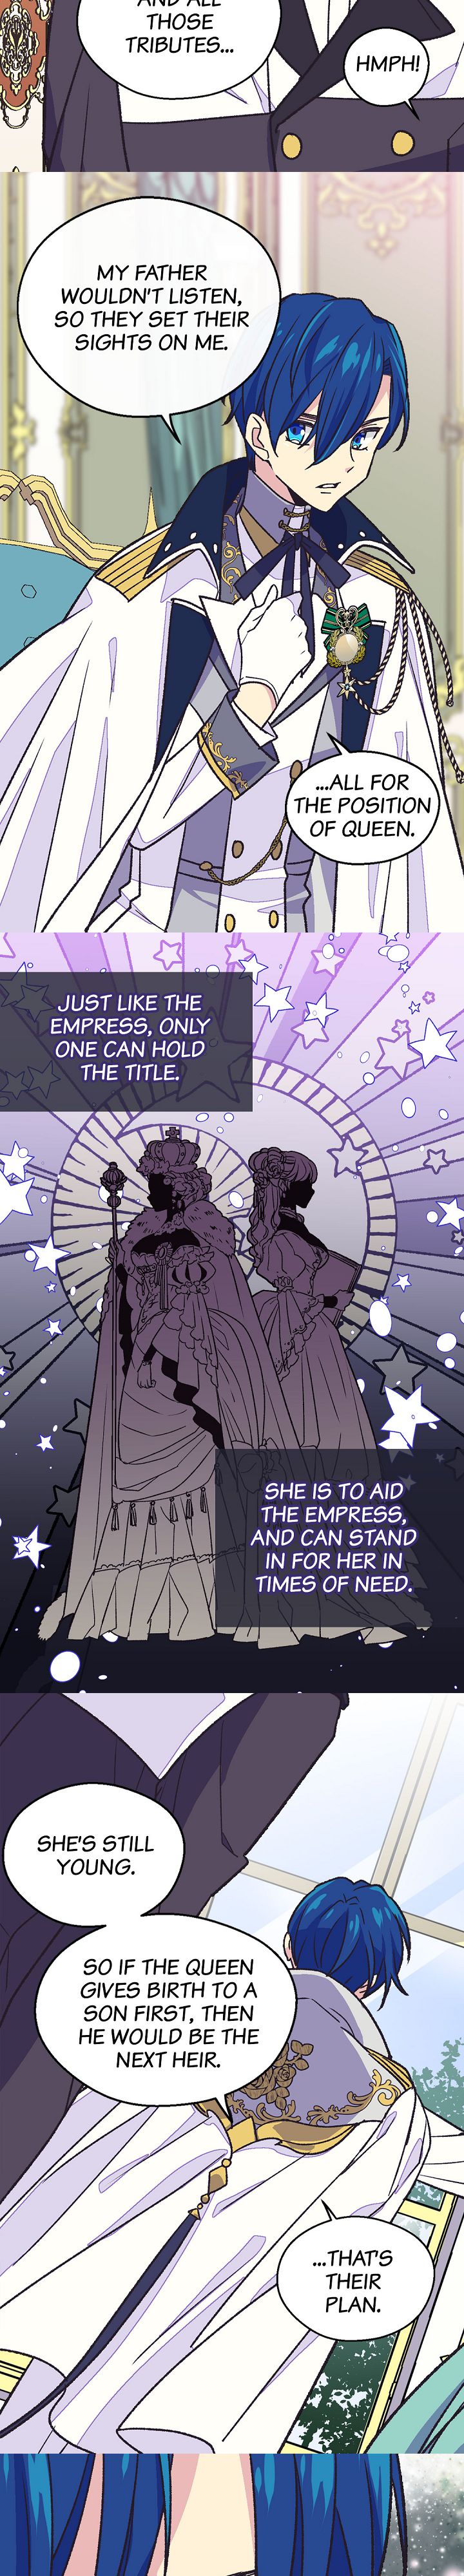 The Abandoned Empress - Page 3